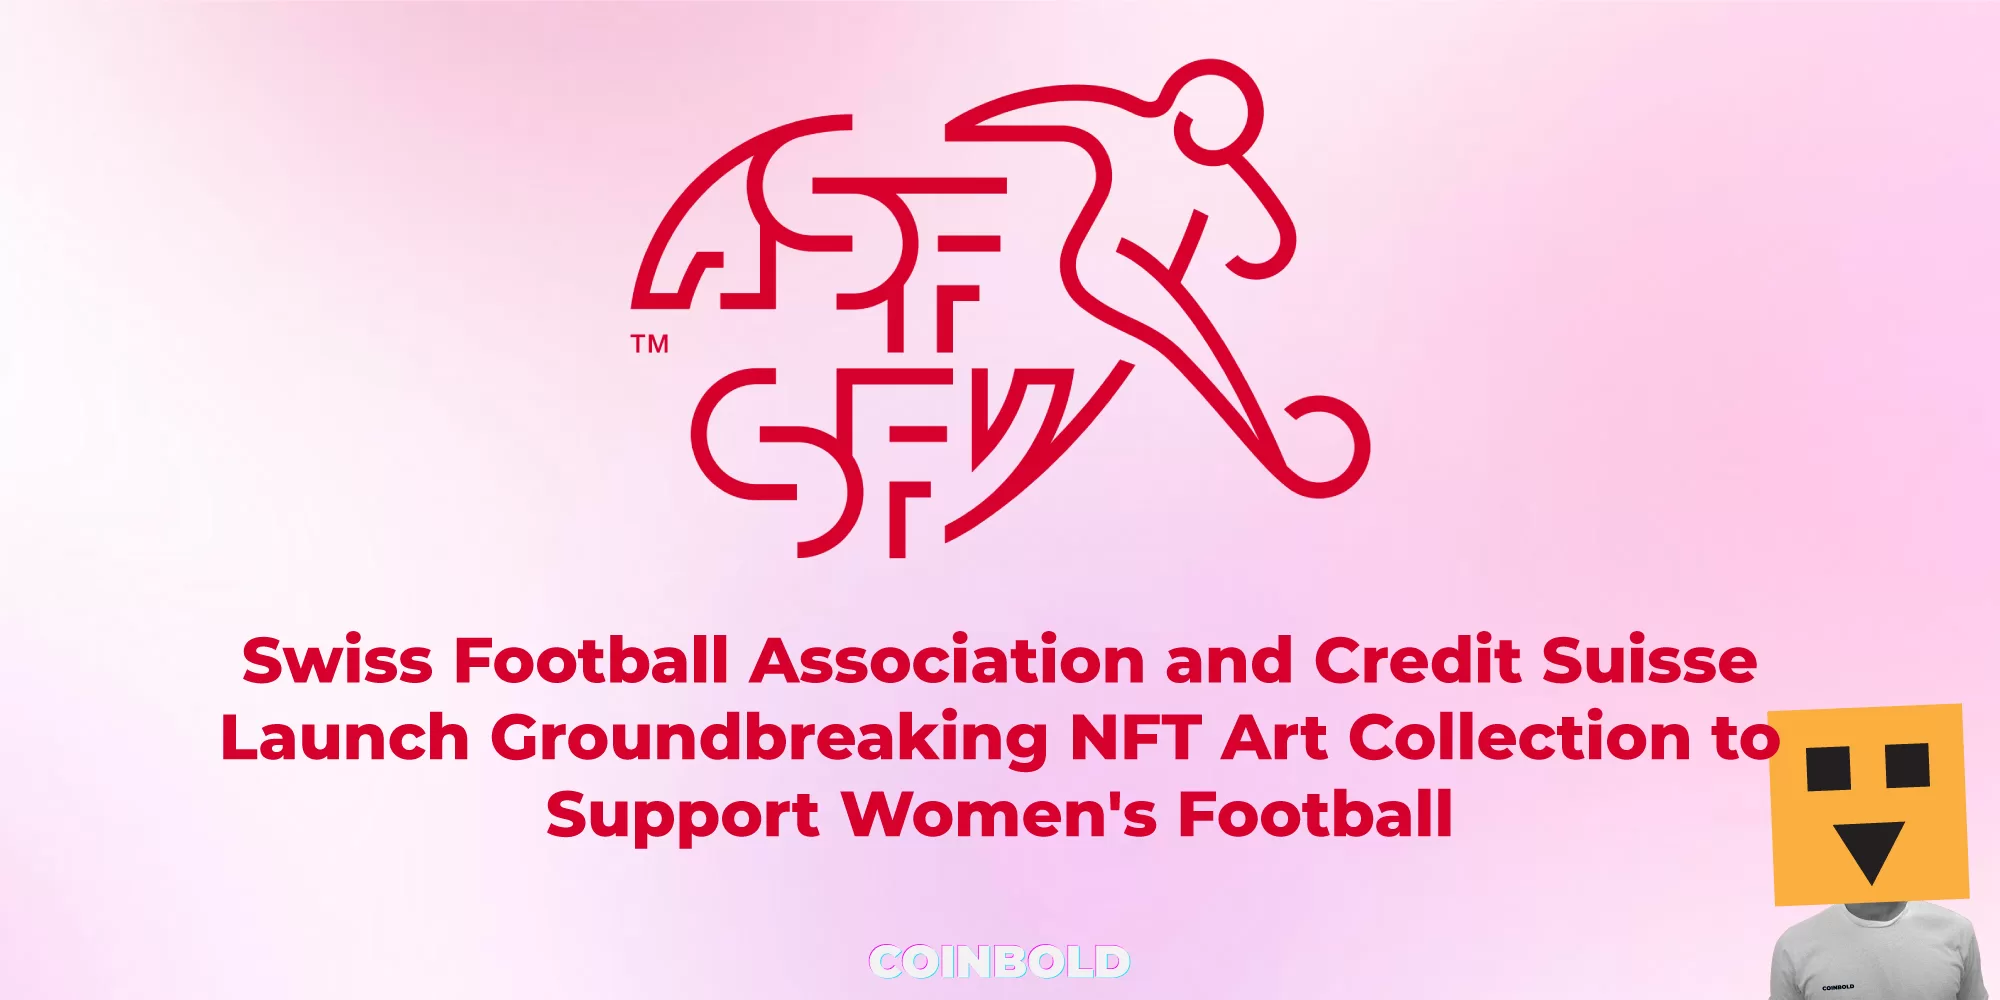 Swiss Football Association and Credit Suisse Launch Groundbreaking NFT Art Collection to Support Women's Football